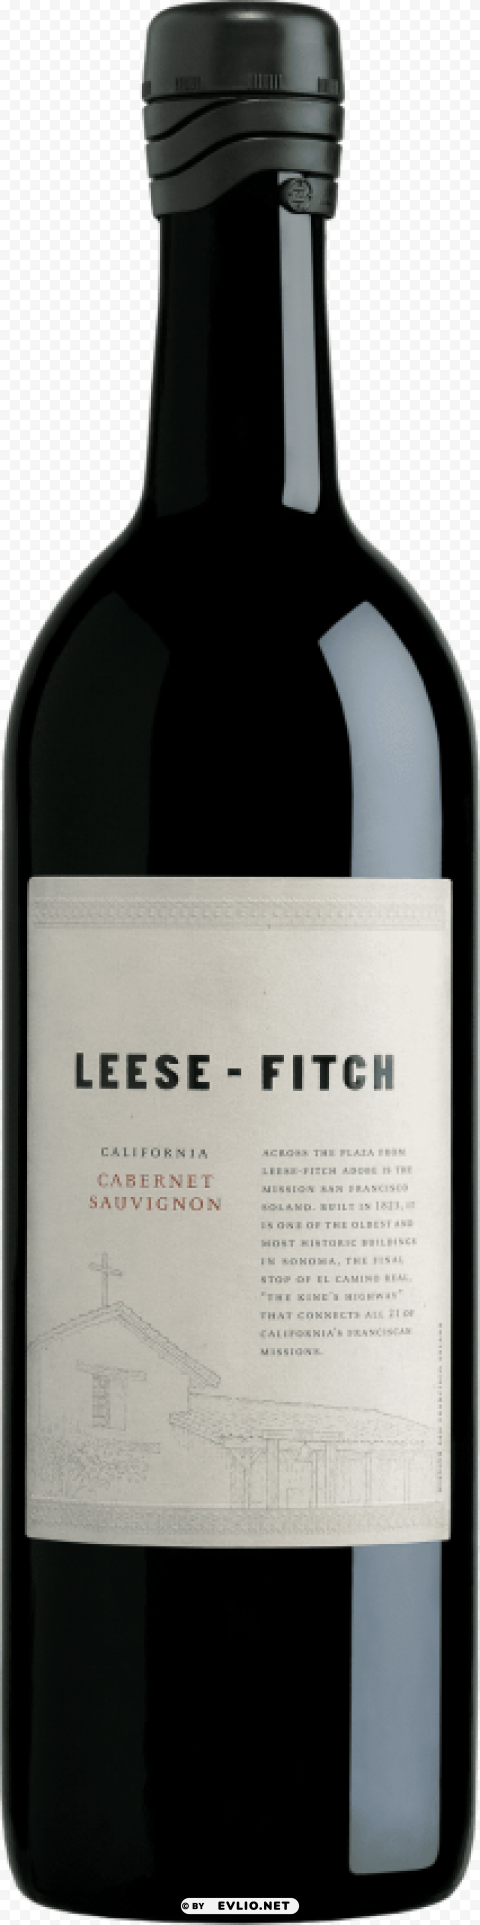 leese fitch bottle PNG high quality